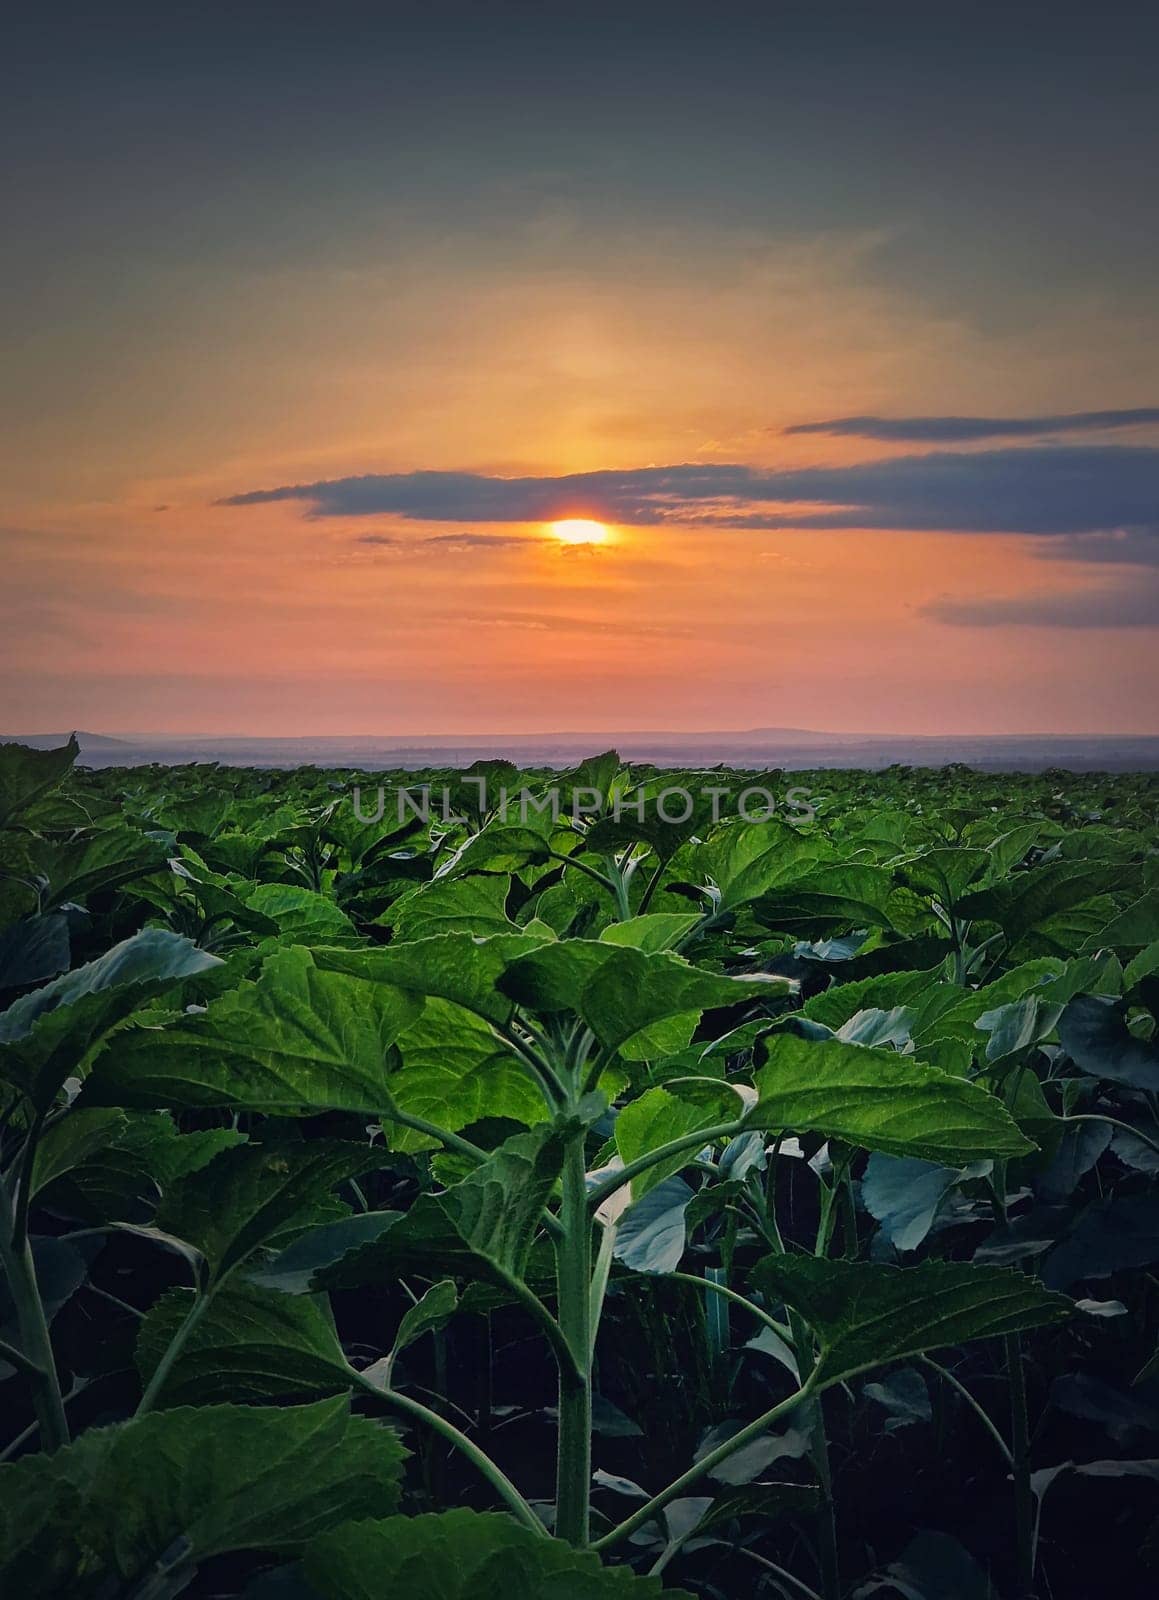 Growing sunflower plants in the field over sunset sky background, vertical scene by psychoshadow